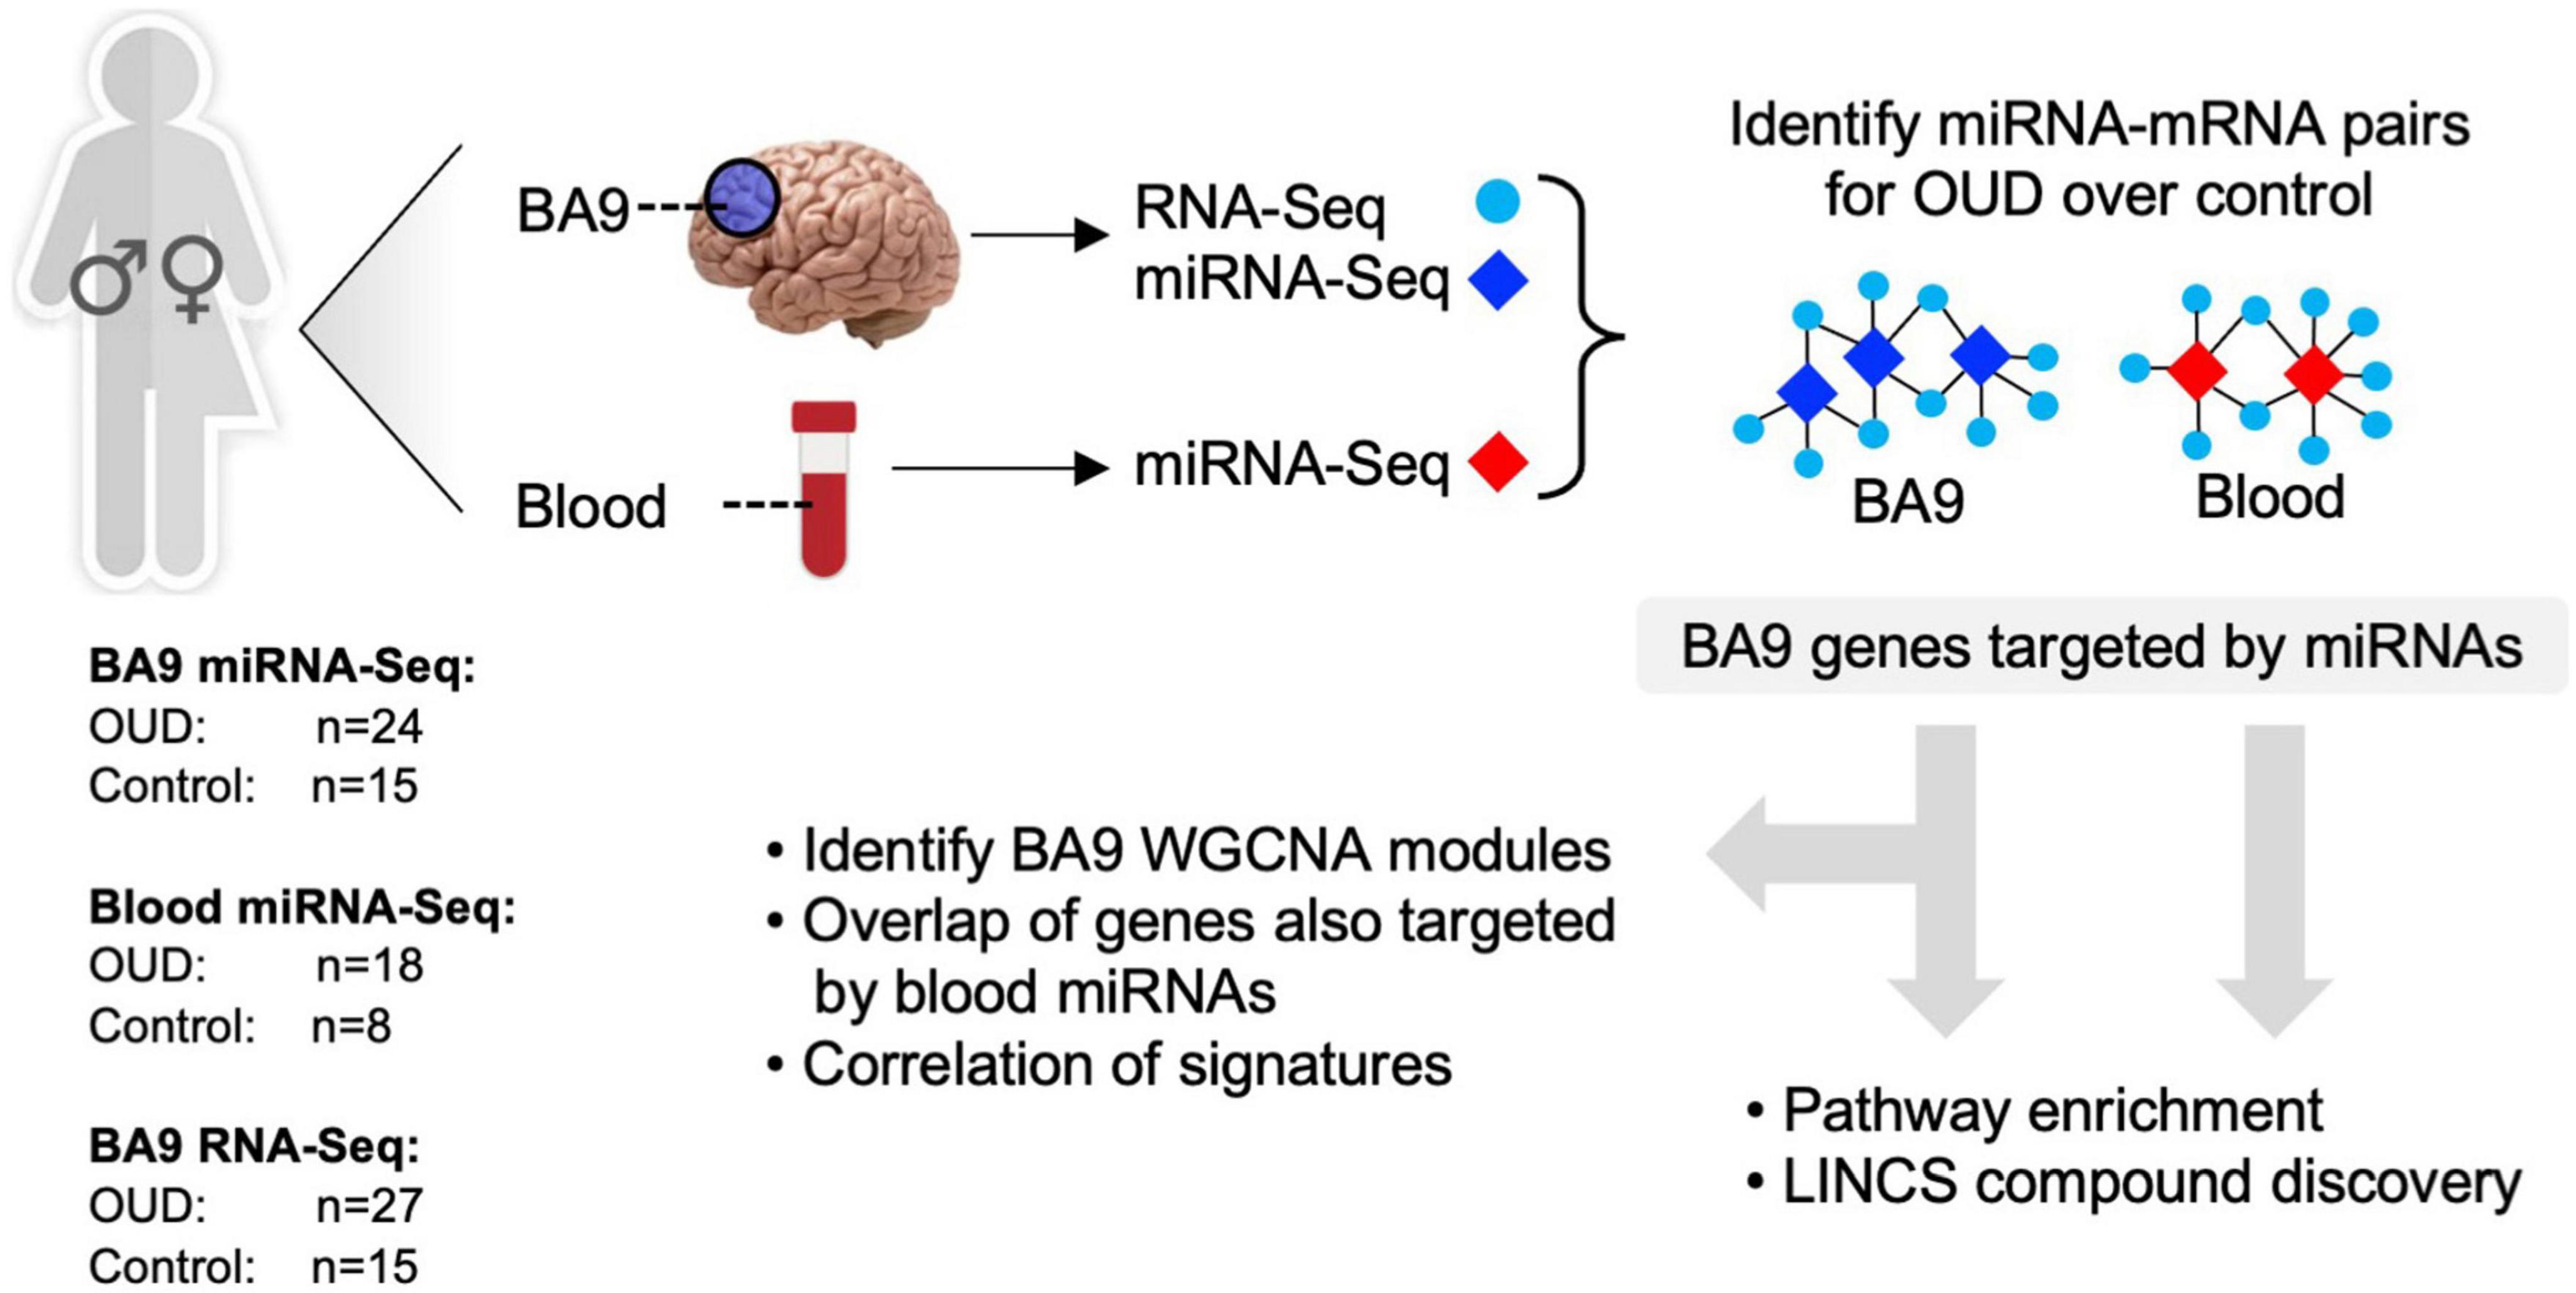 MicroRNA–mRNA networks are dysregulated in opioid use disorder postmortem brain: Further evidence for opioid-induced neurovascular alterations